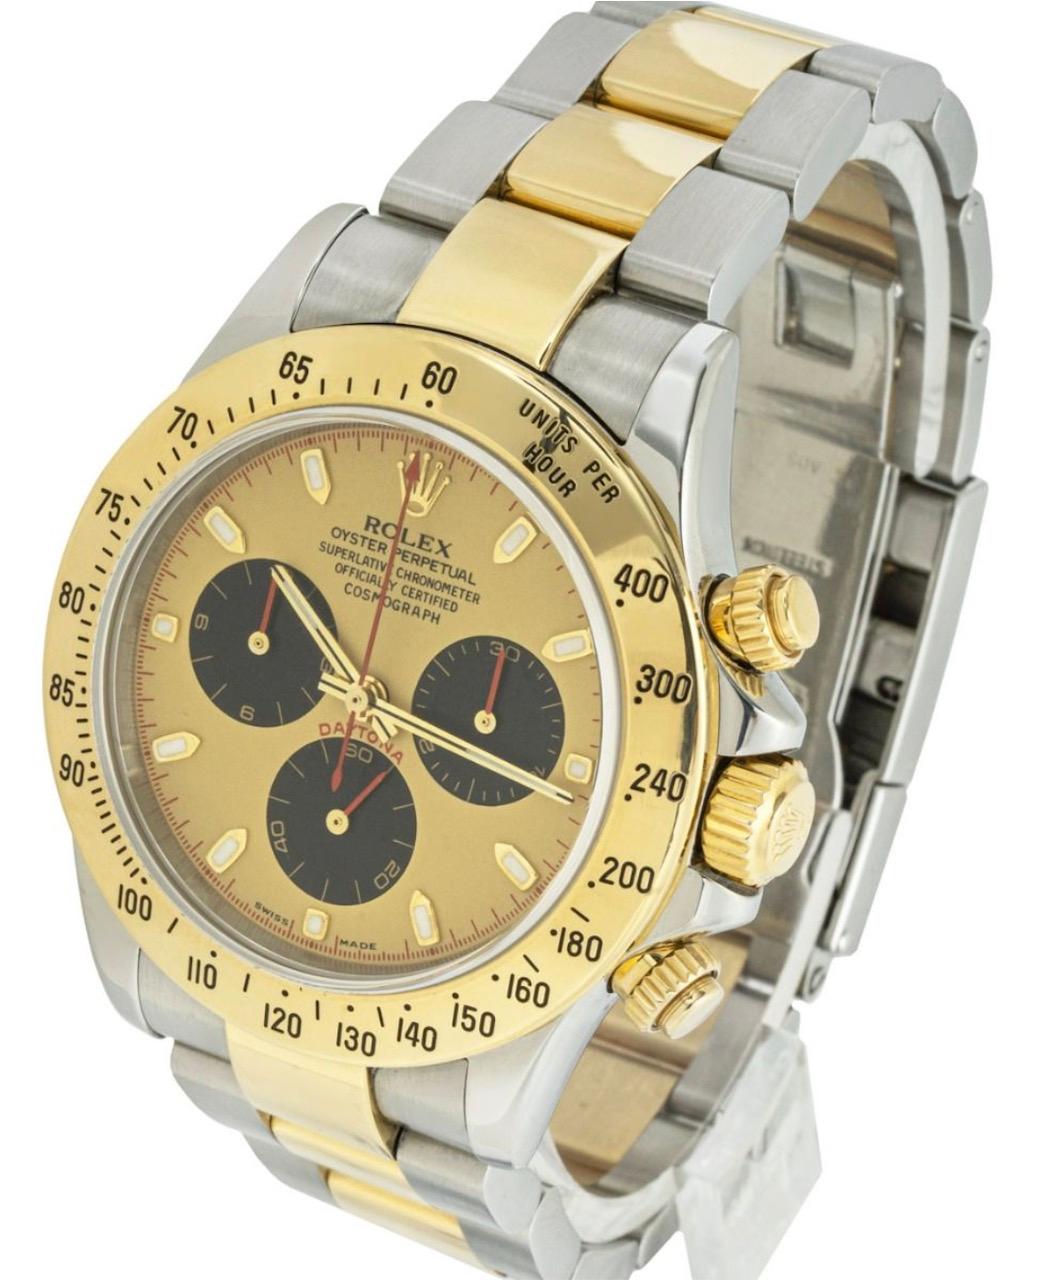 Rolex Daytona Steel & Gold 116523 Watch In Excellent Condition For Sale In London, GB